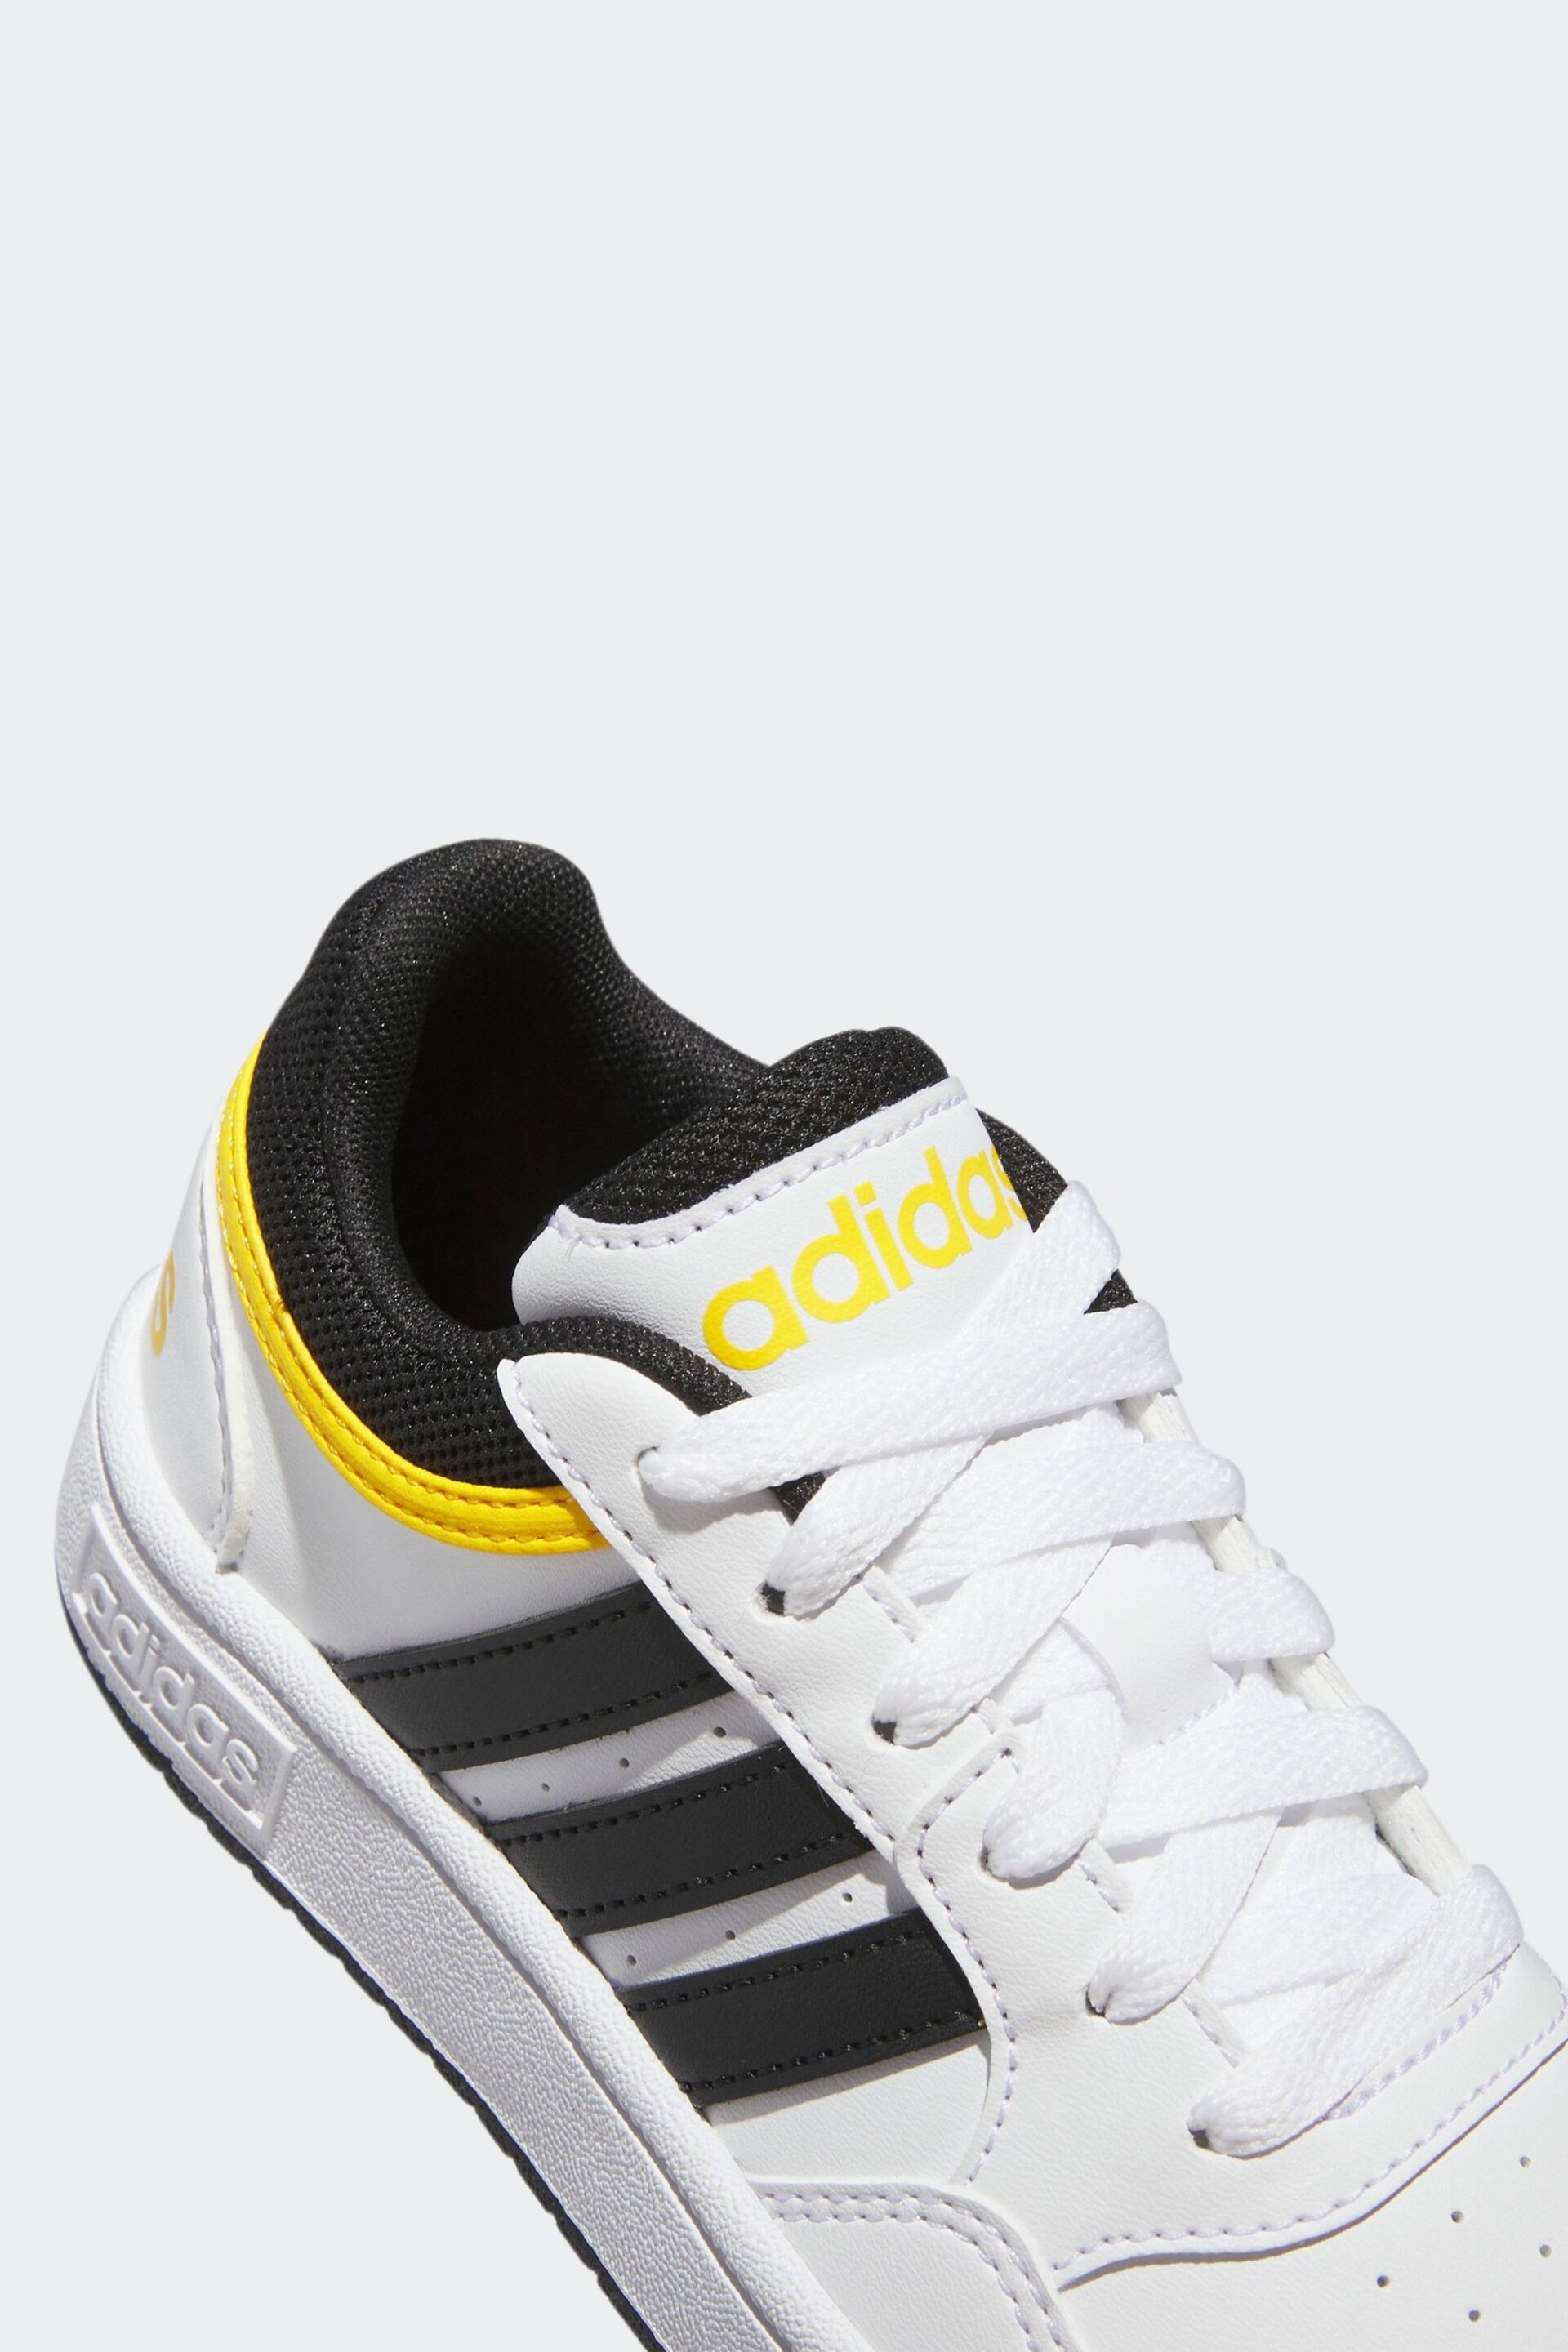 adidas Yellow/Black Hoops Trainers - Image 7 of 8